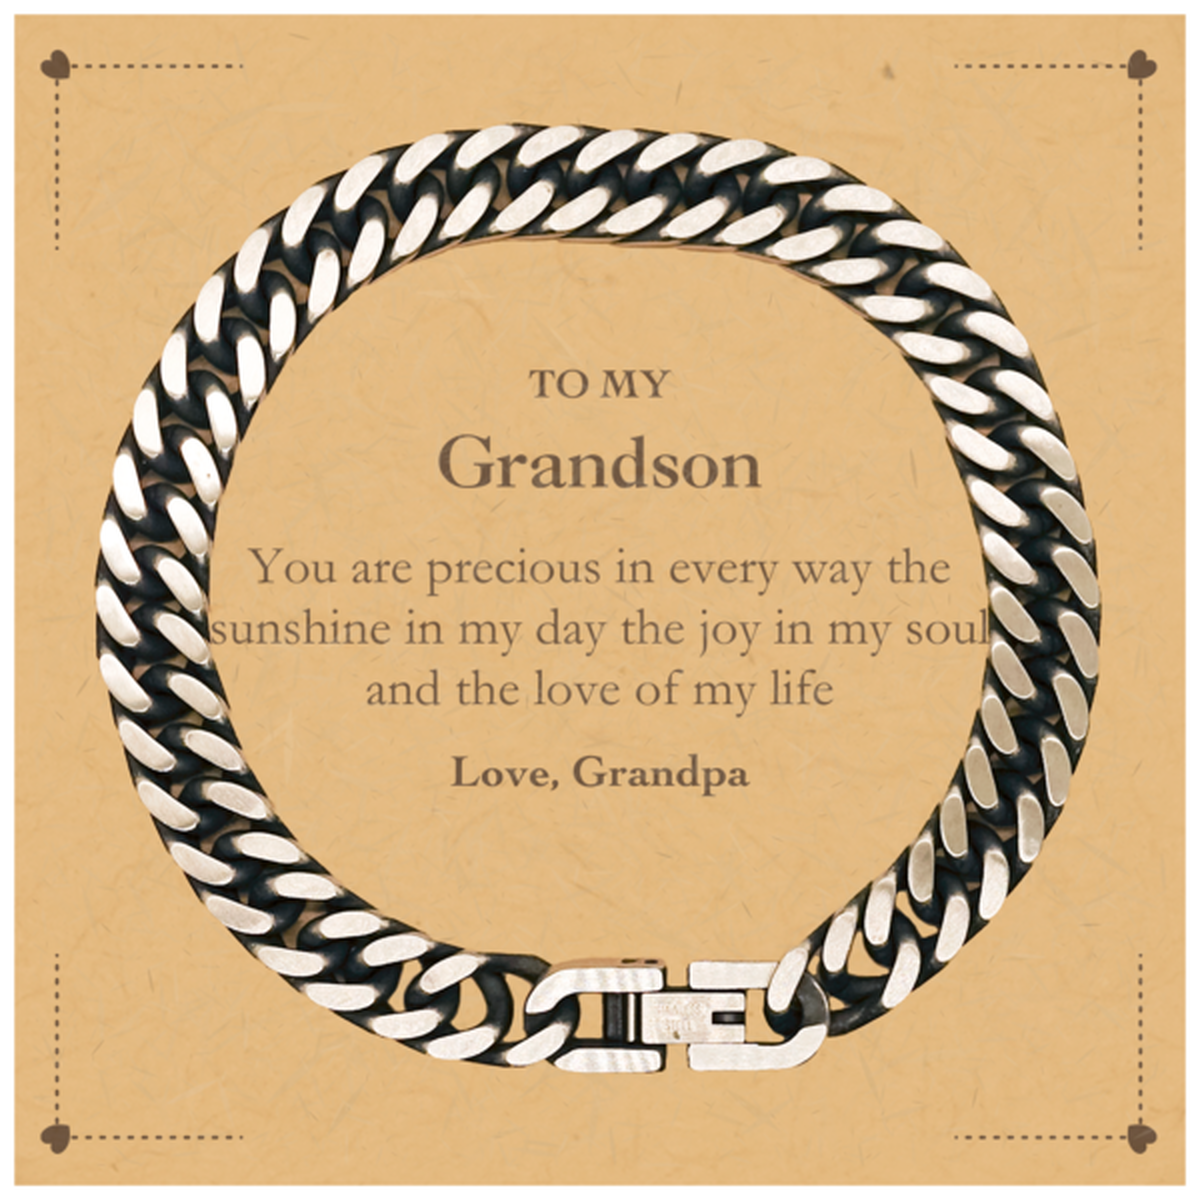 Graduation Gifts for Grandson Cuban Link Chain Bracelet Present from Grandpa, Christmas Grandson Birthday Gifts Grandson You are precious in every way the sunshine in my day. Love, Grandpa